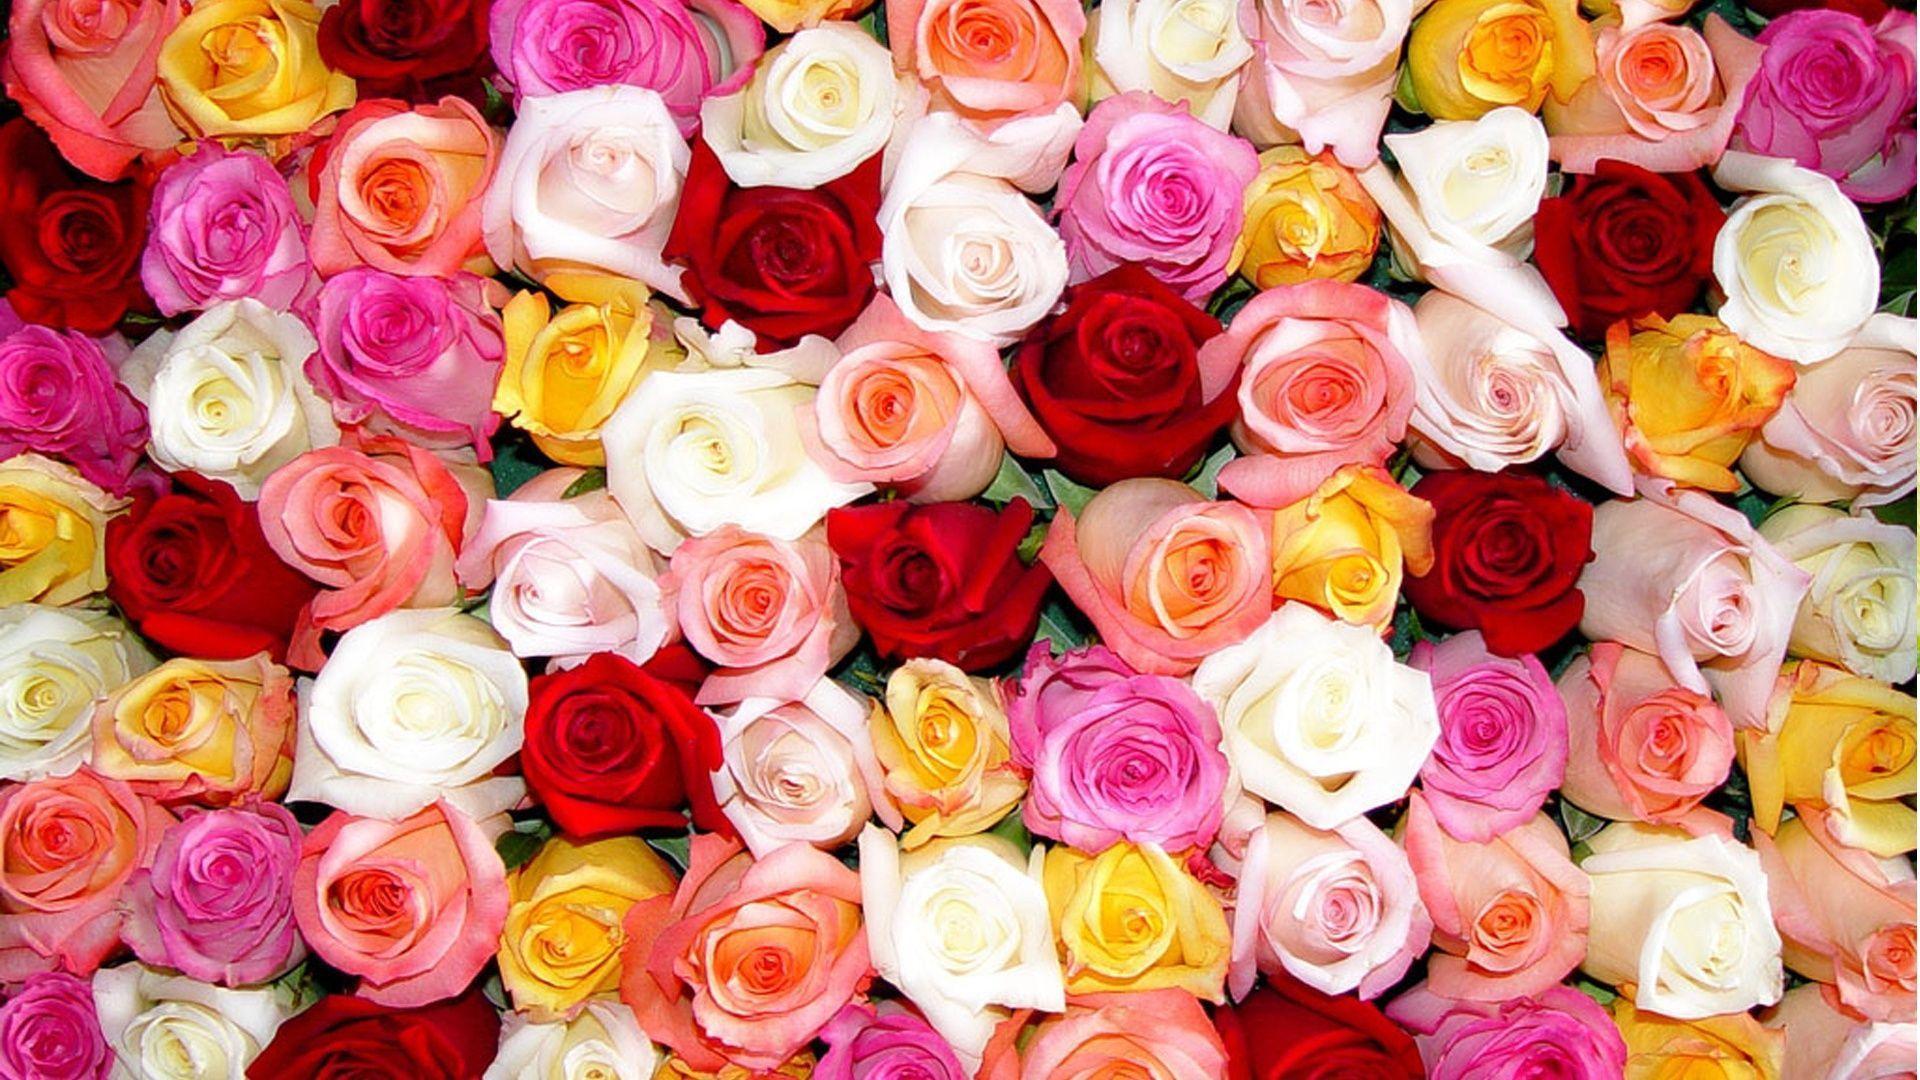 Colorful Roses Wallpaper HD Day Day Image